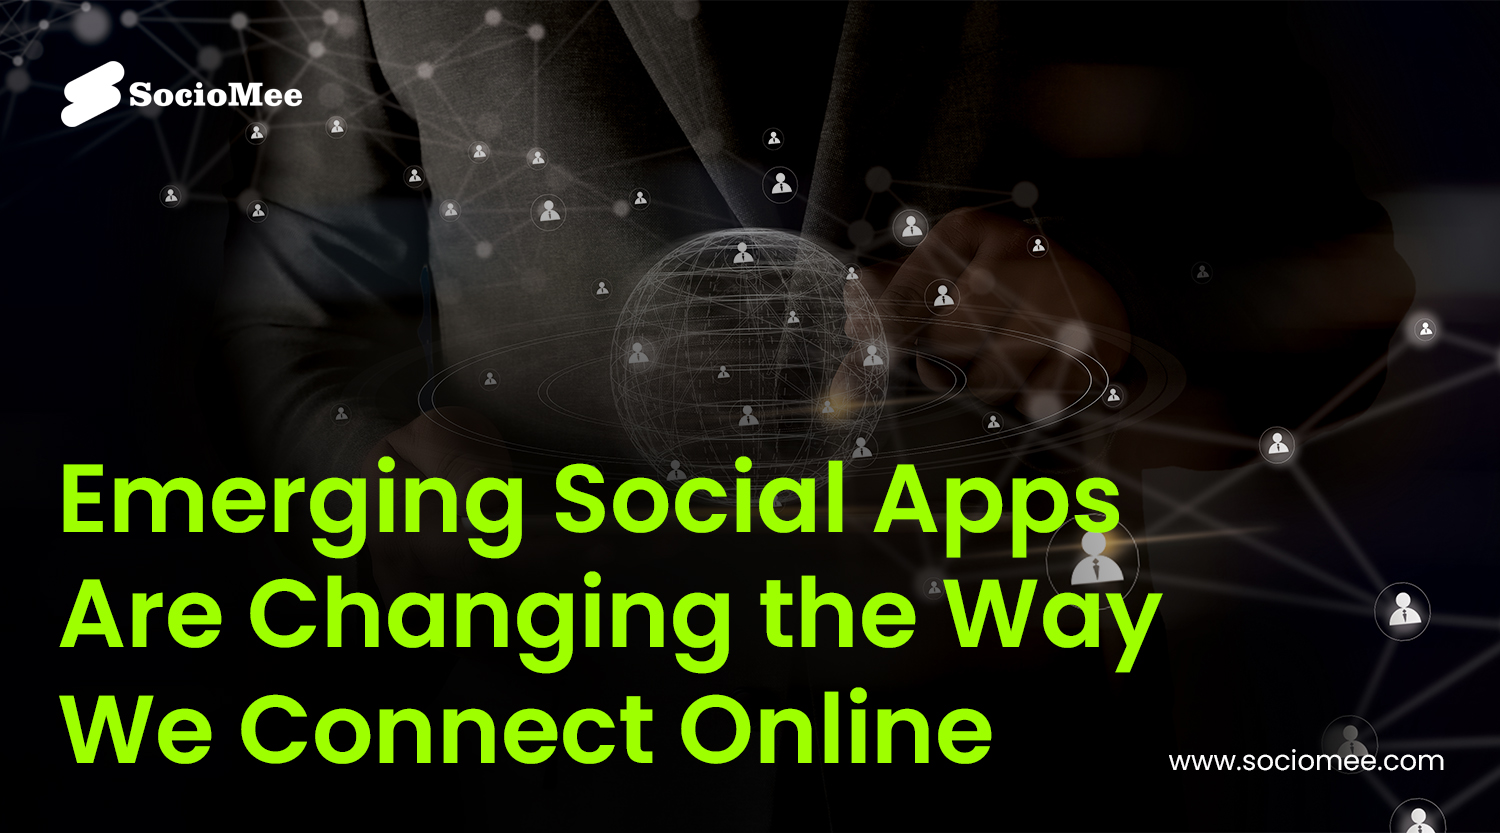 social apps are changing we connect